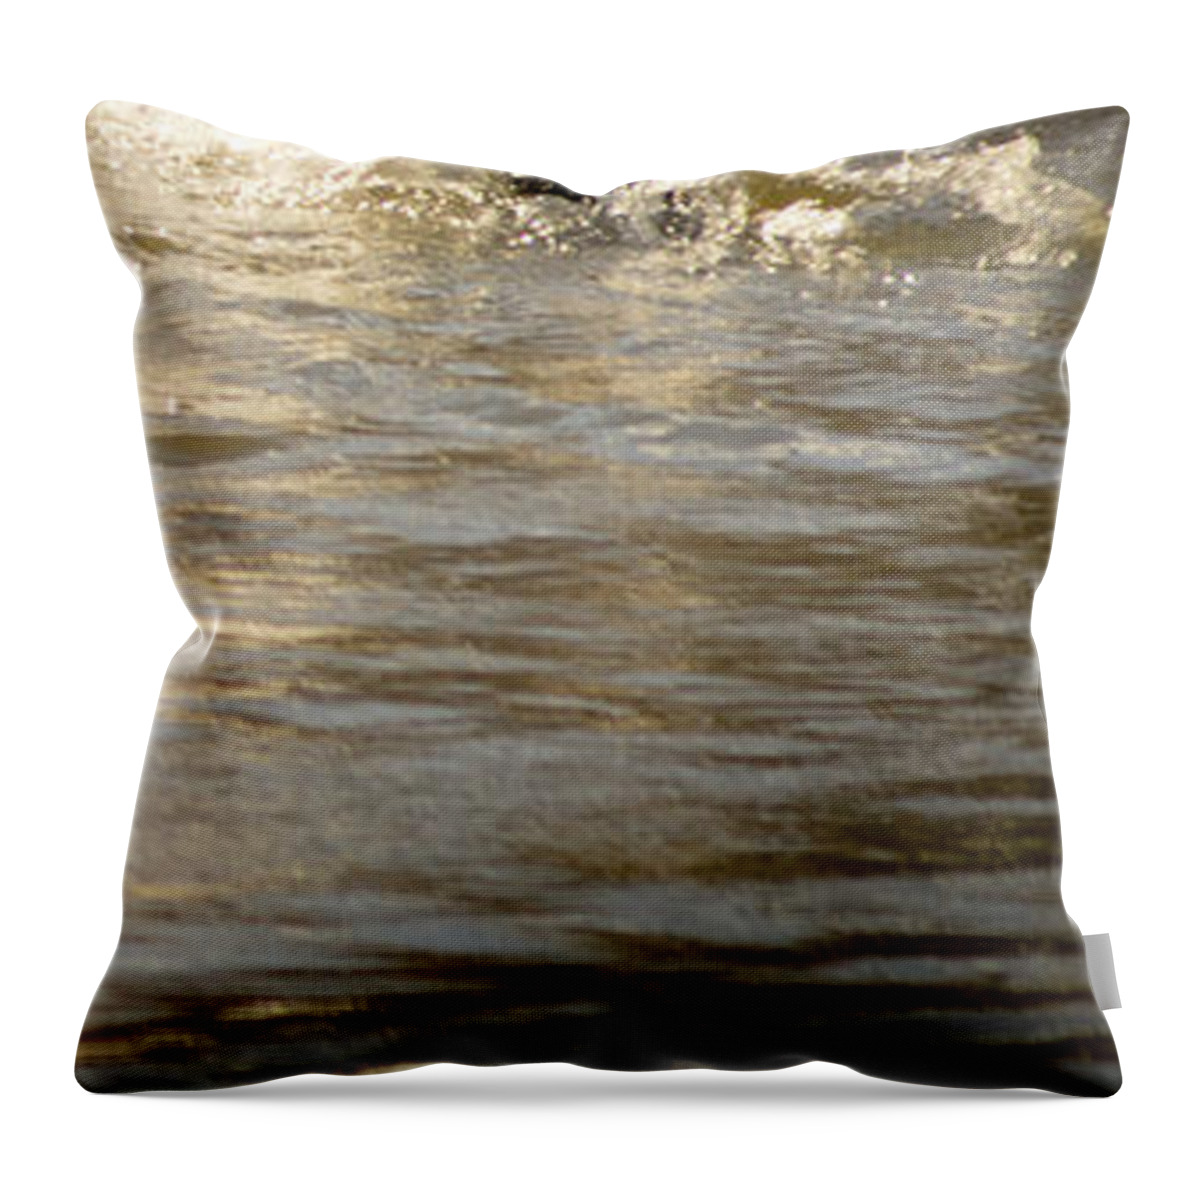 Lwater Throw Pillow featuring the photograph Minden 4 by Catherine Sobredo